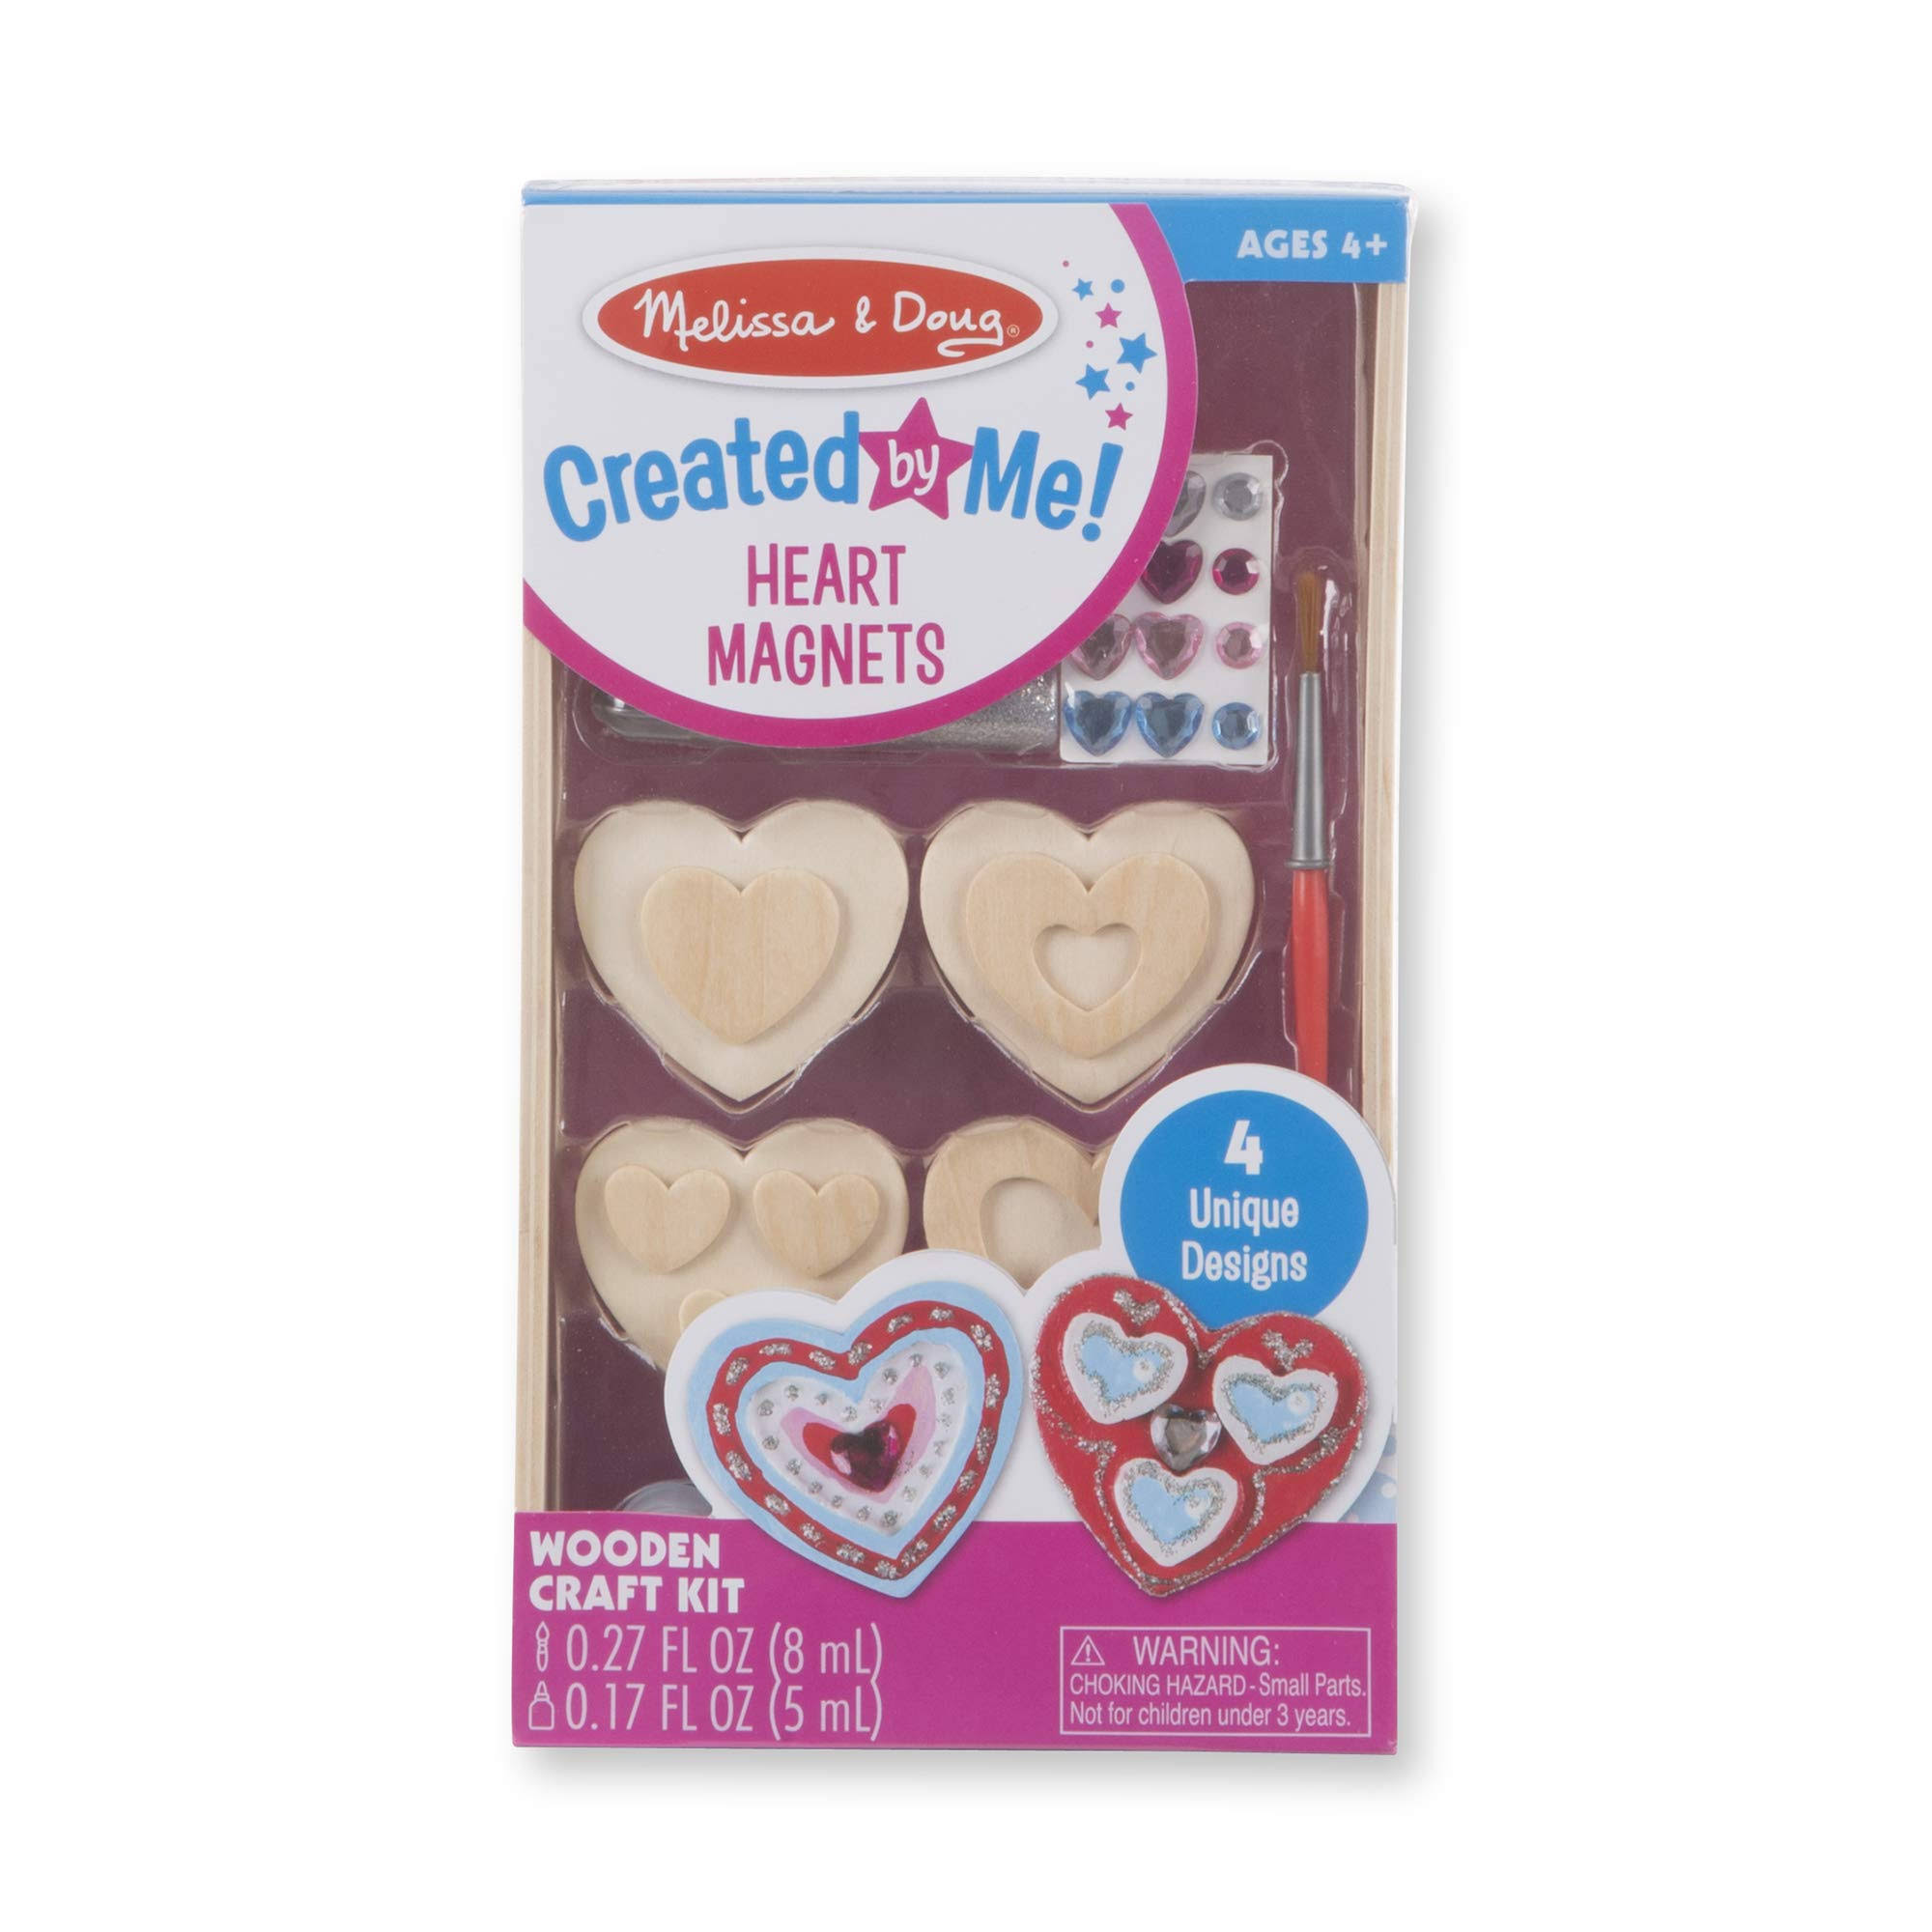 Melissa & Doug Wooden Craft Kit, Heart Magnets, Ages 4+